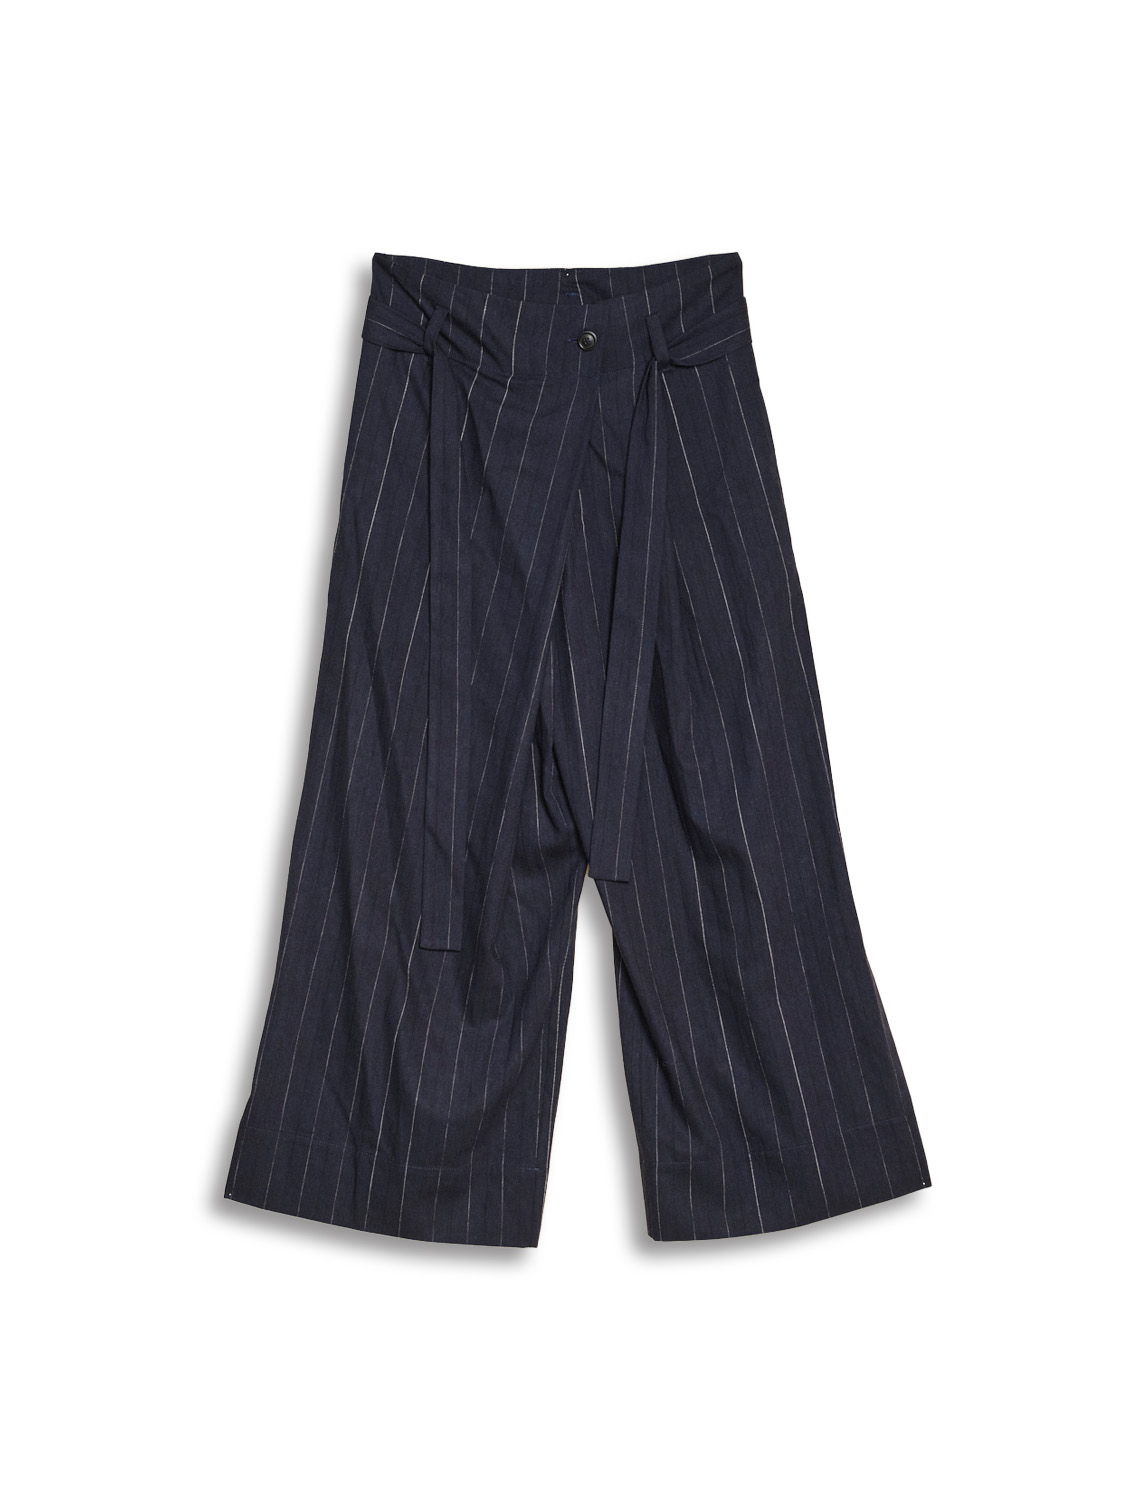 Pinstripe pants with virgin wool content